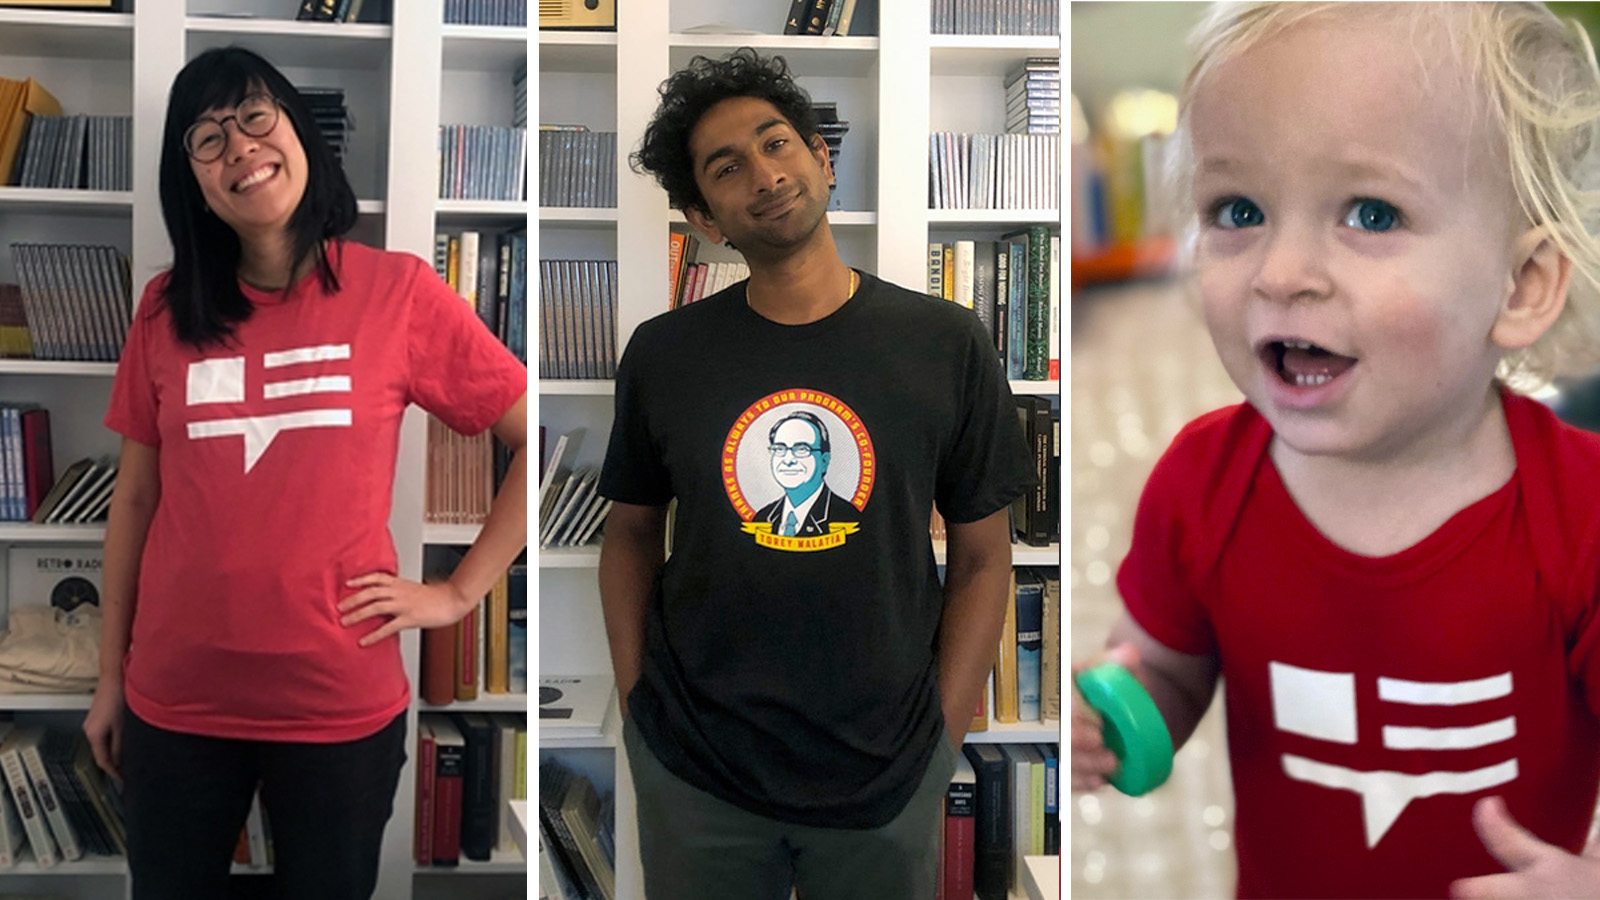 Three people modeling This American life clothing - a red logo t-shirt, the Torey t-shit, and a baby onesie.